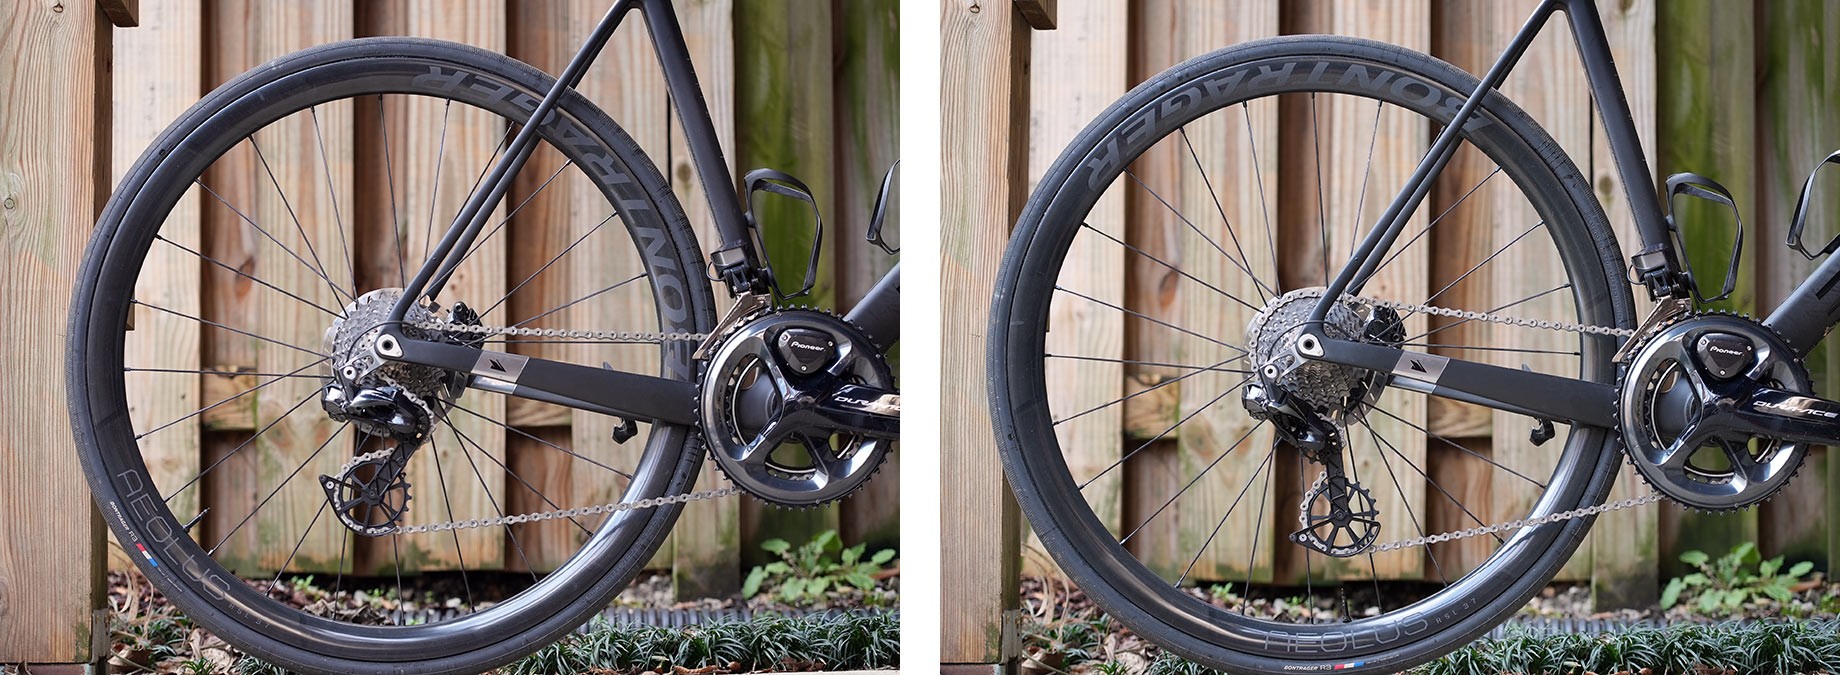 chain length and derailleur position comparison after installing an oversize pulley cage